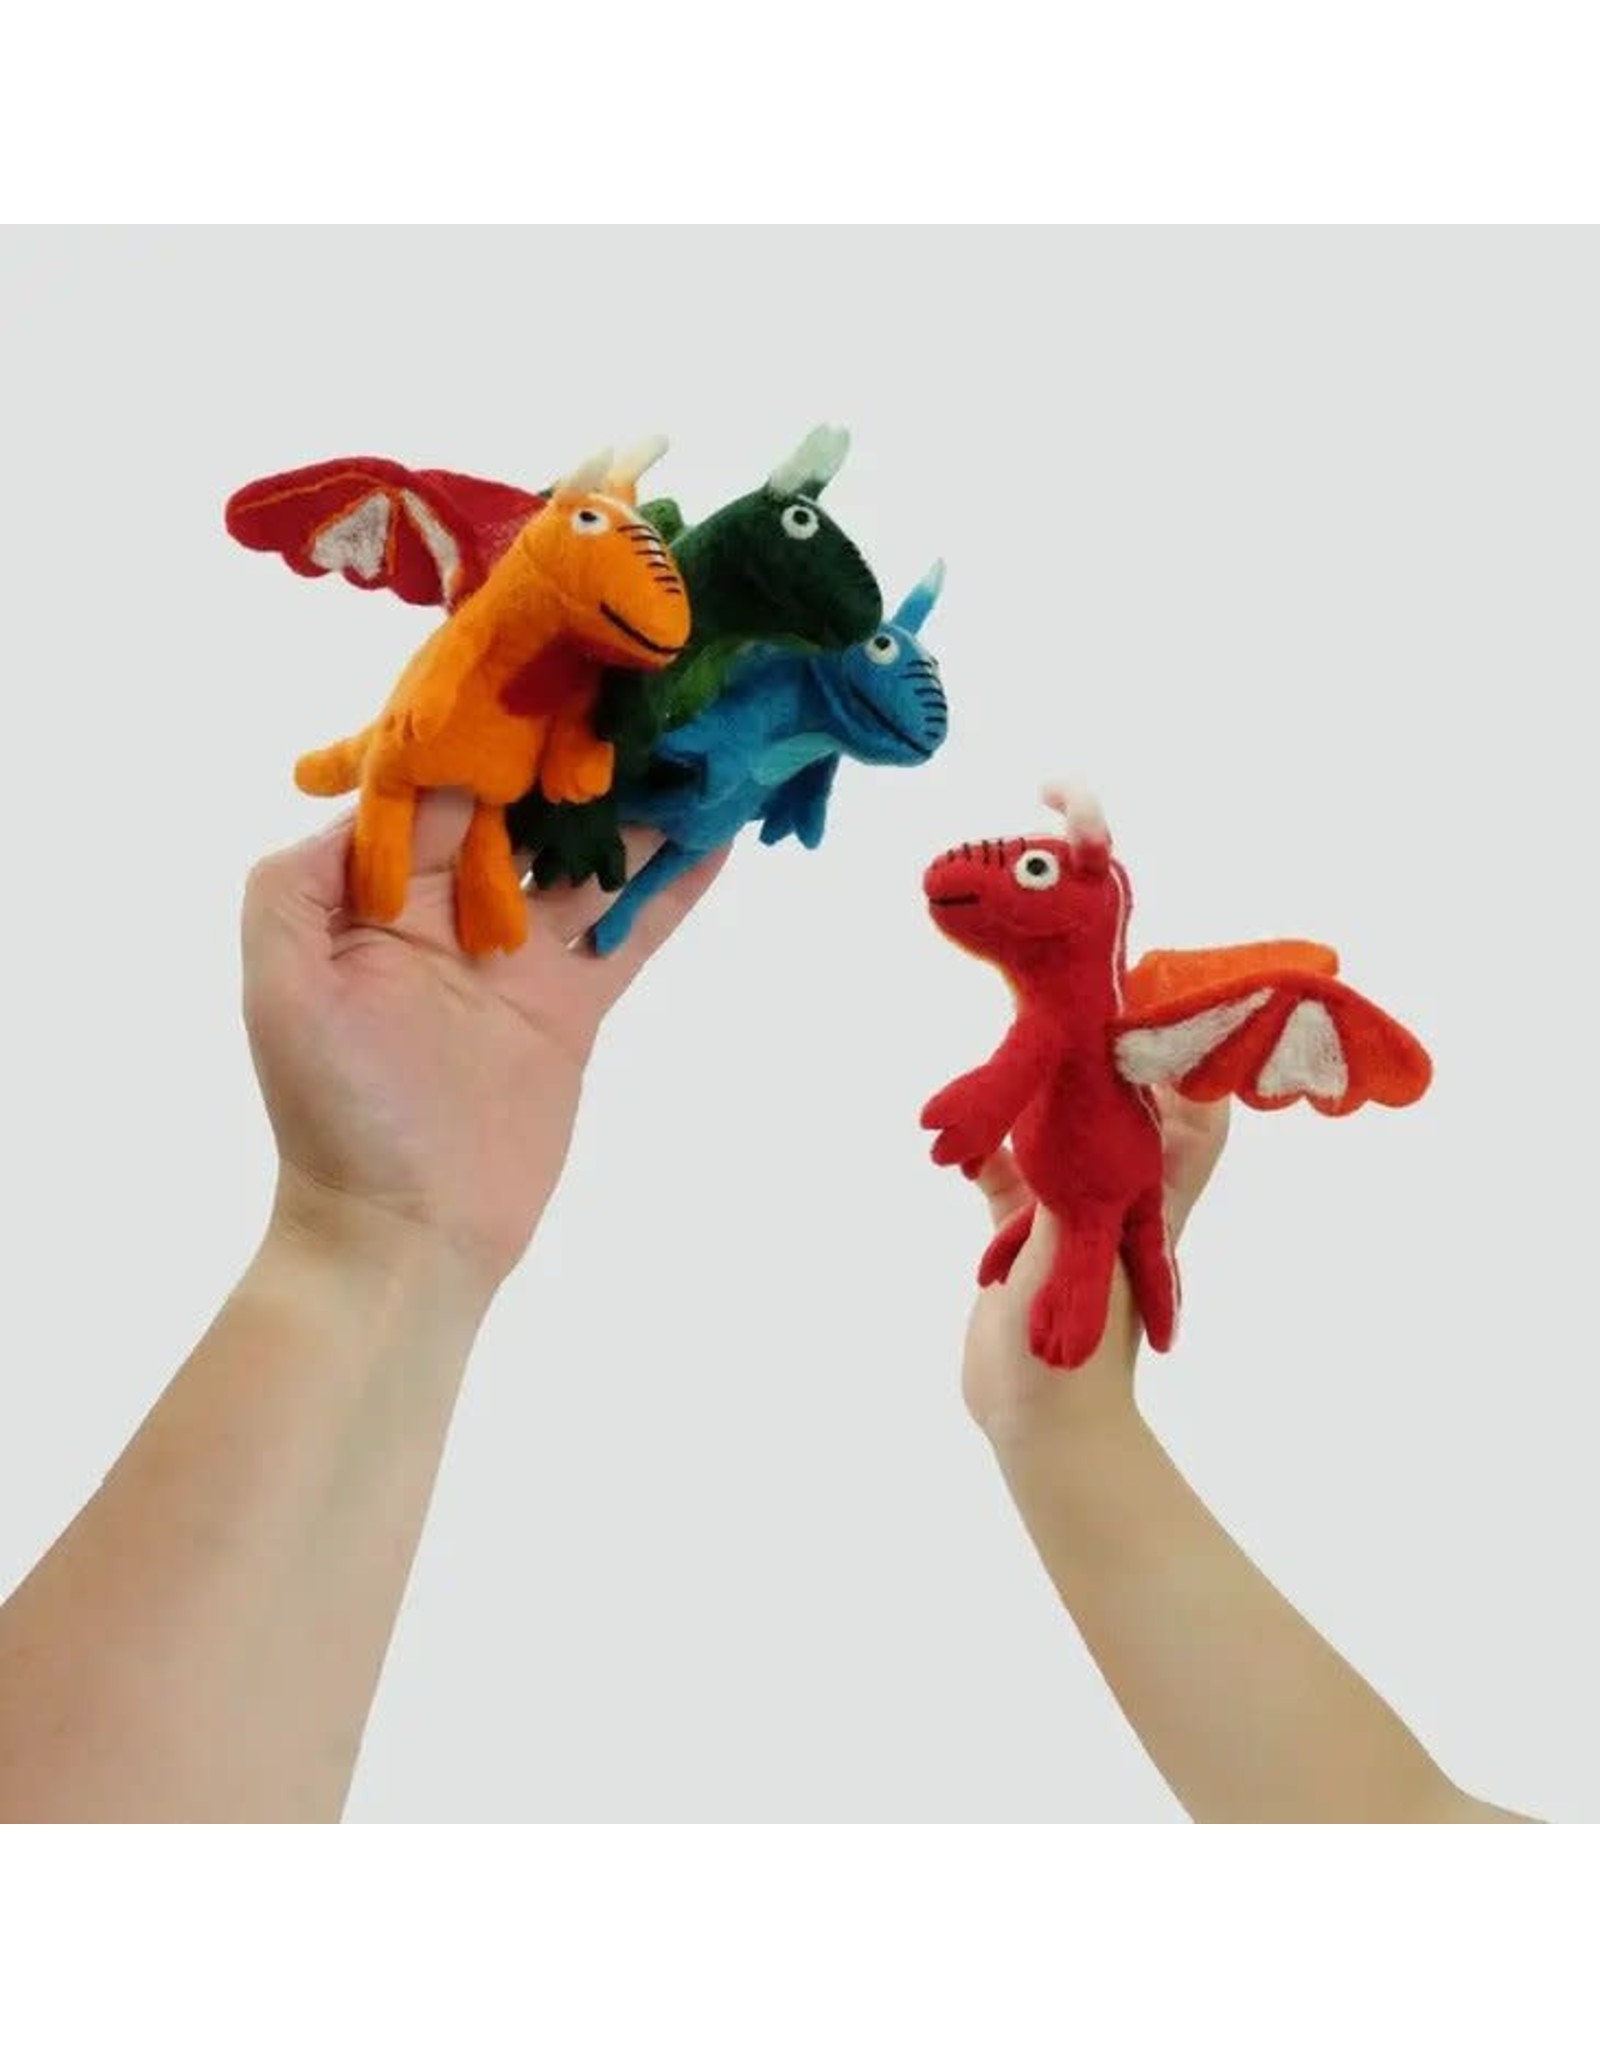 Trade roots Felt Finger Puppets, Wild Animals/Mythical, Nepal